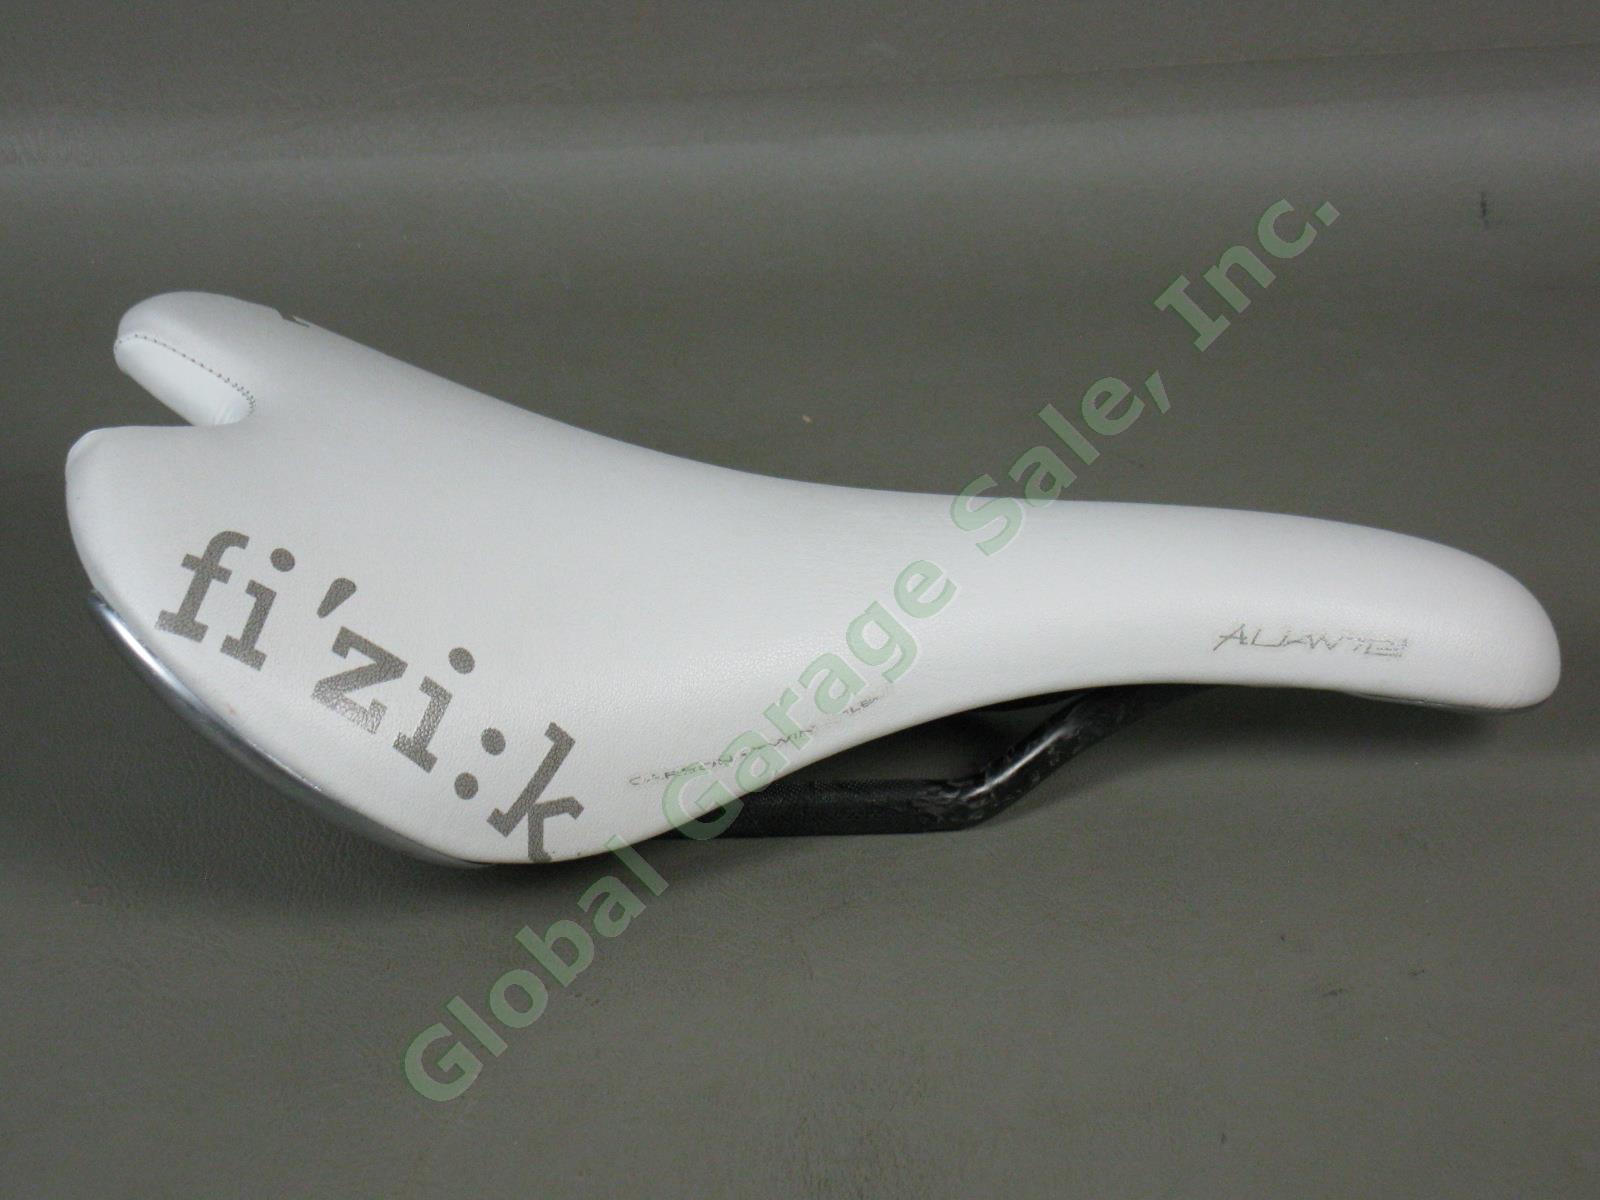 Fizik Aliante Braided Carbon Bicycle Bike Saddle Seat One Owner Made In Italy NR 2